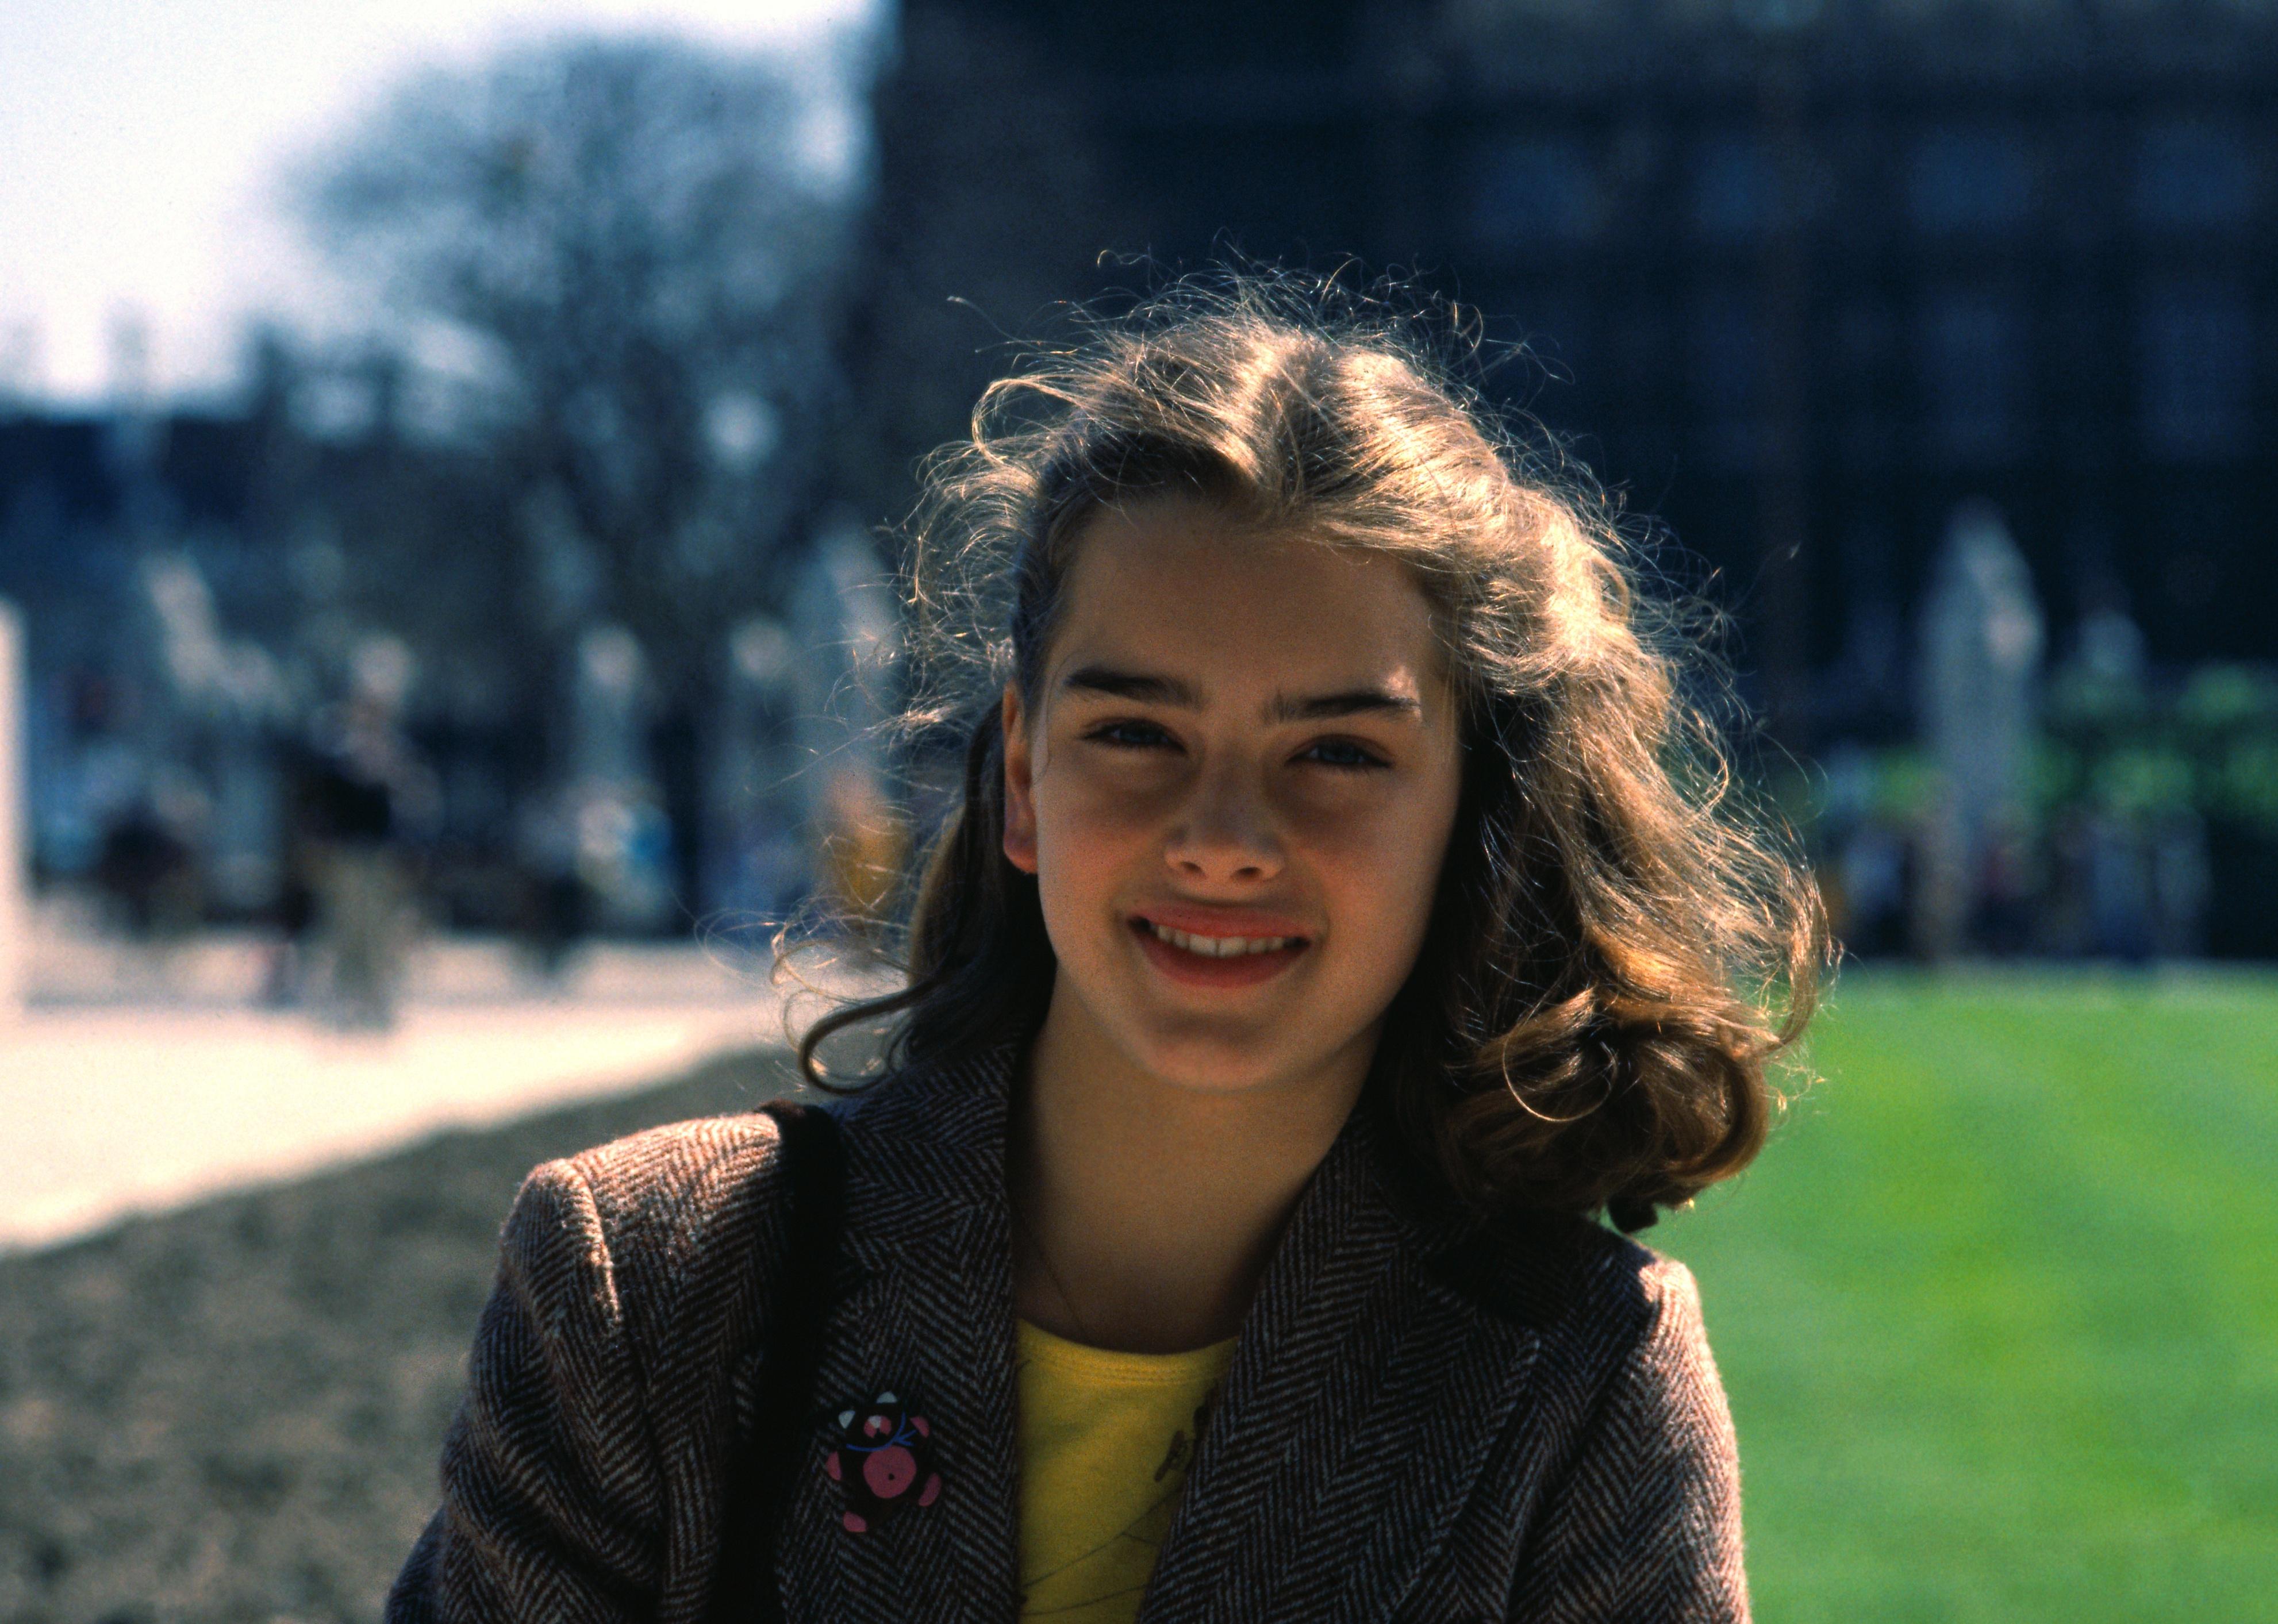 Actress Brooke Shields poses for a photo on May 24, 1978.